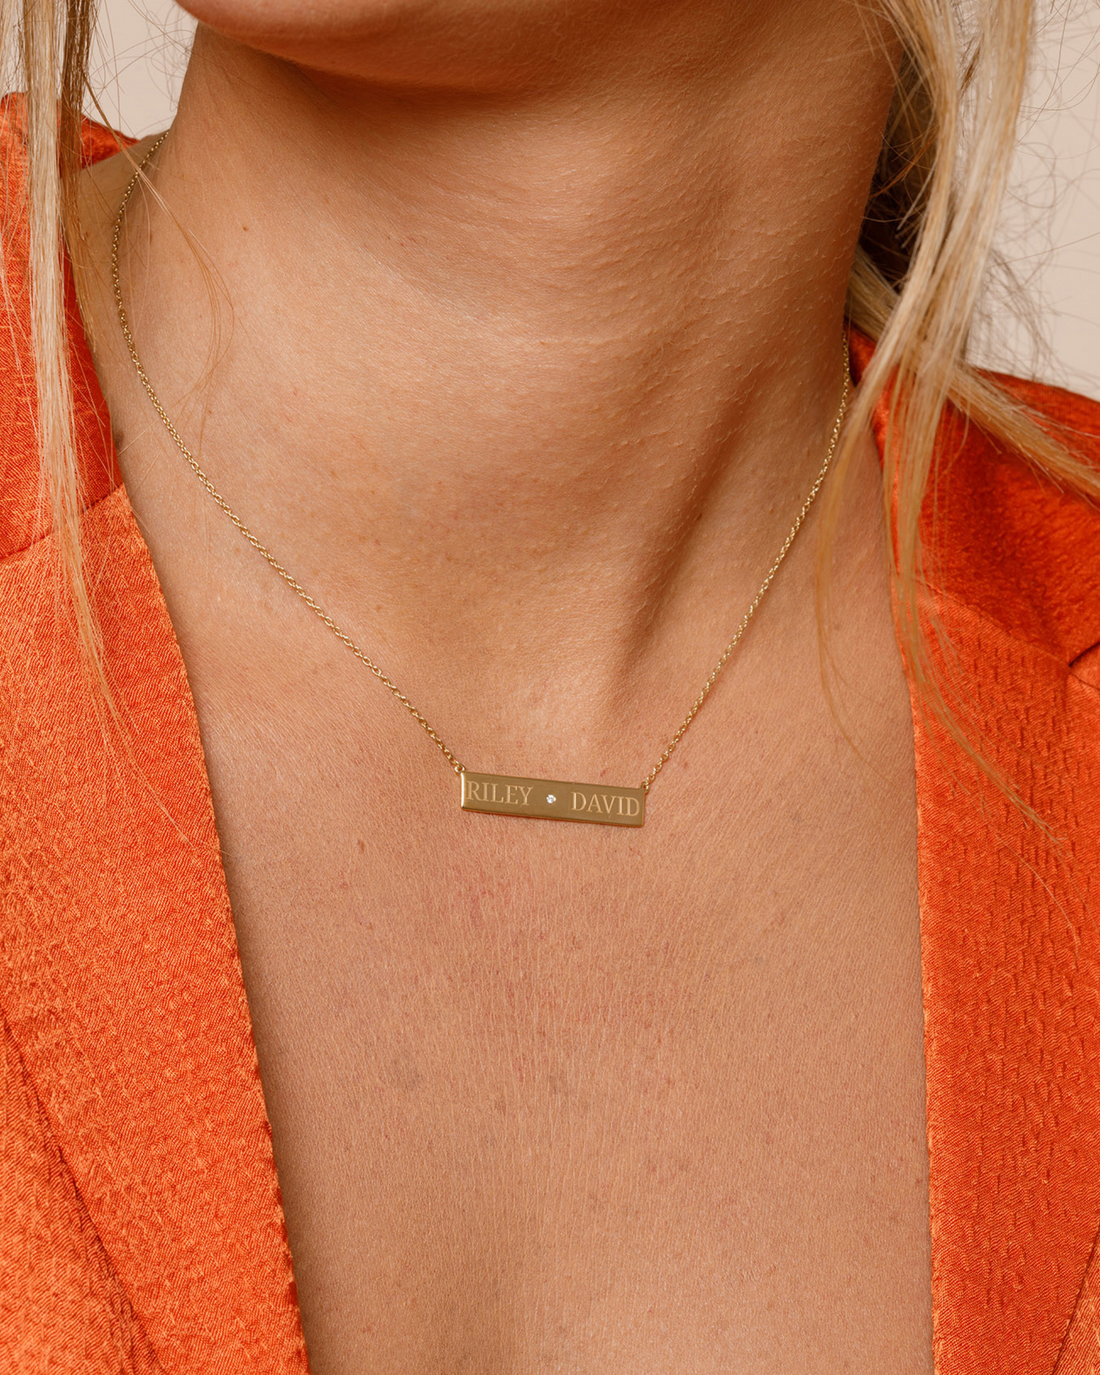 name necklace for women, solid gold name necklace, name jewelry